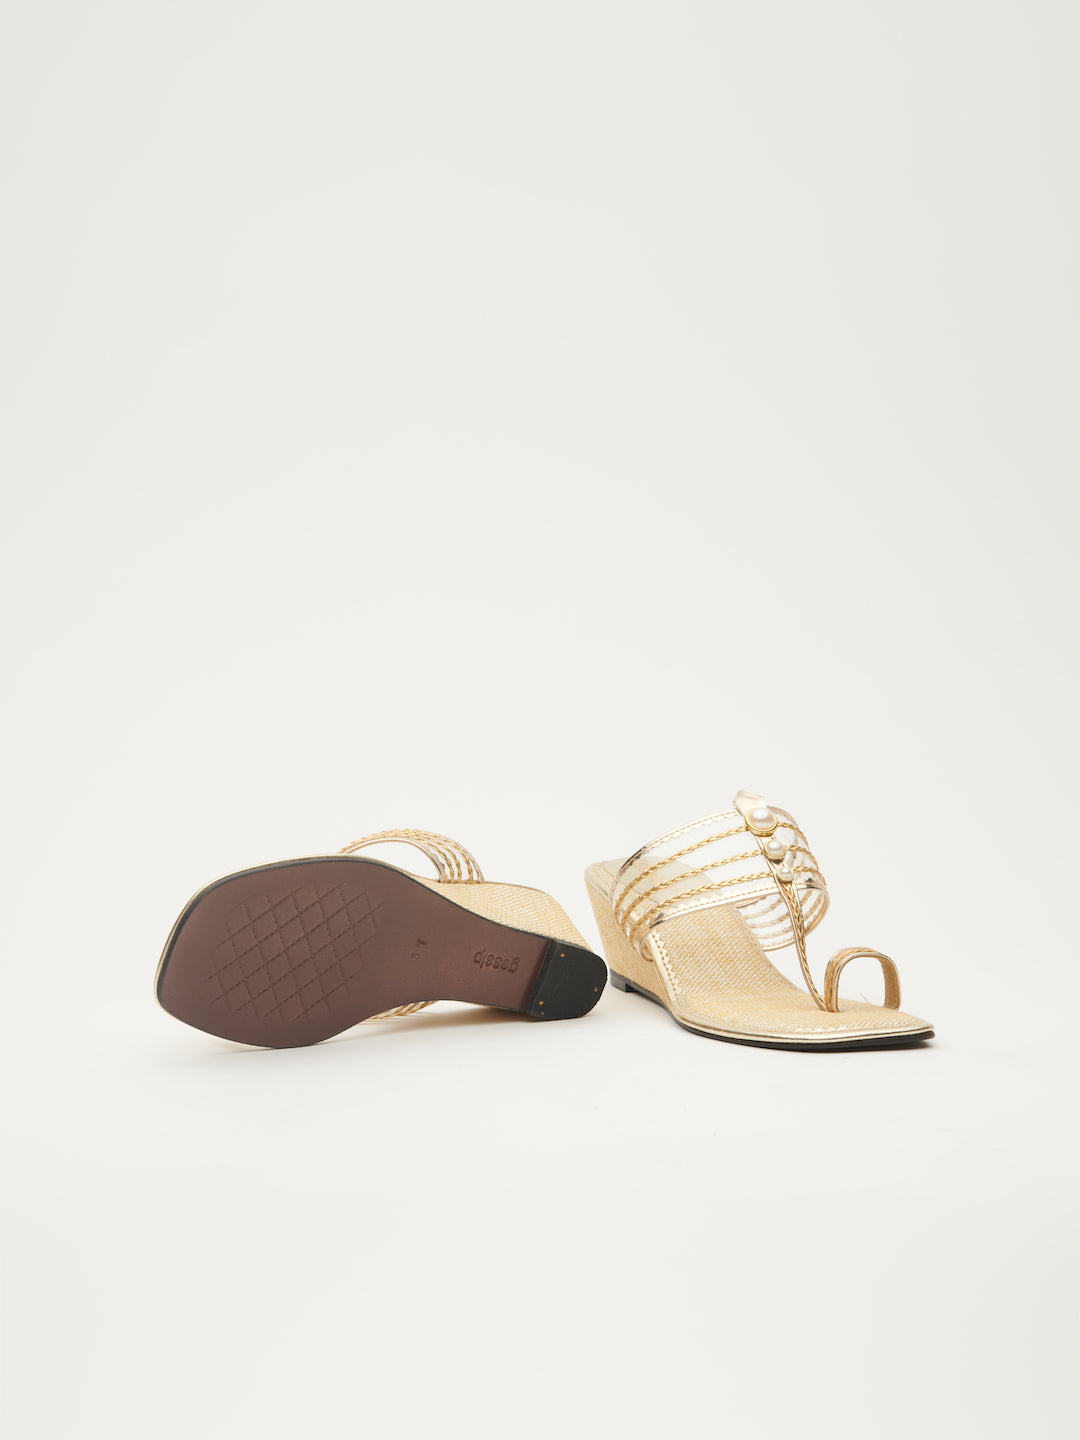 'PEARL'SUIT OF HAPPINESS WEDGES